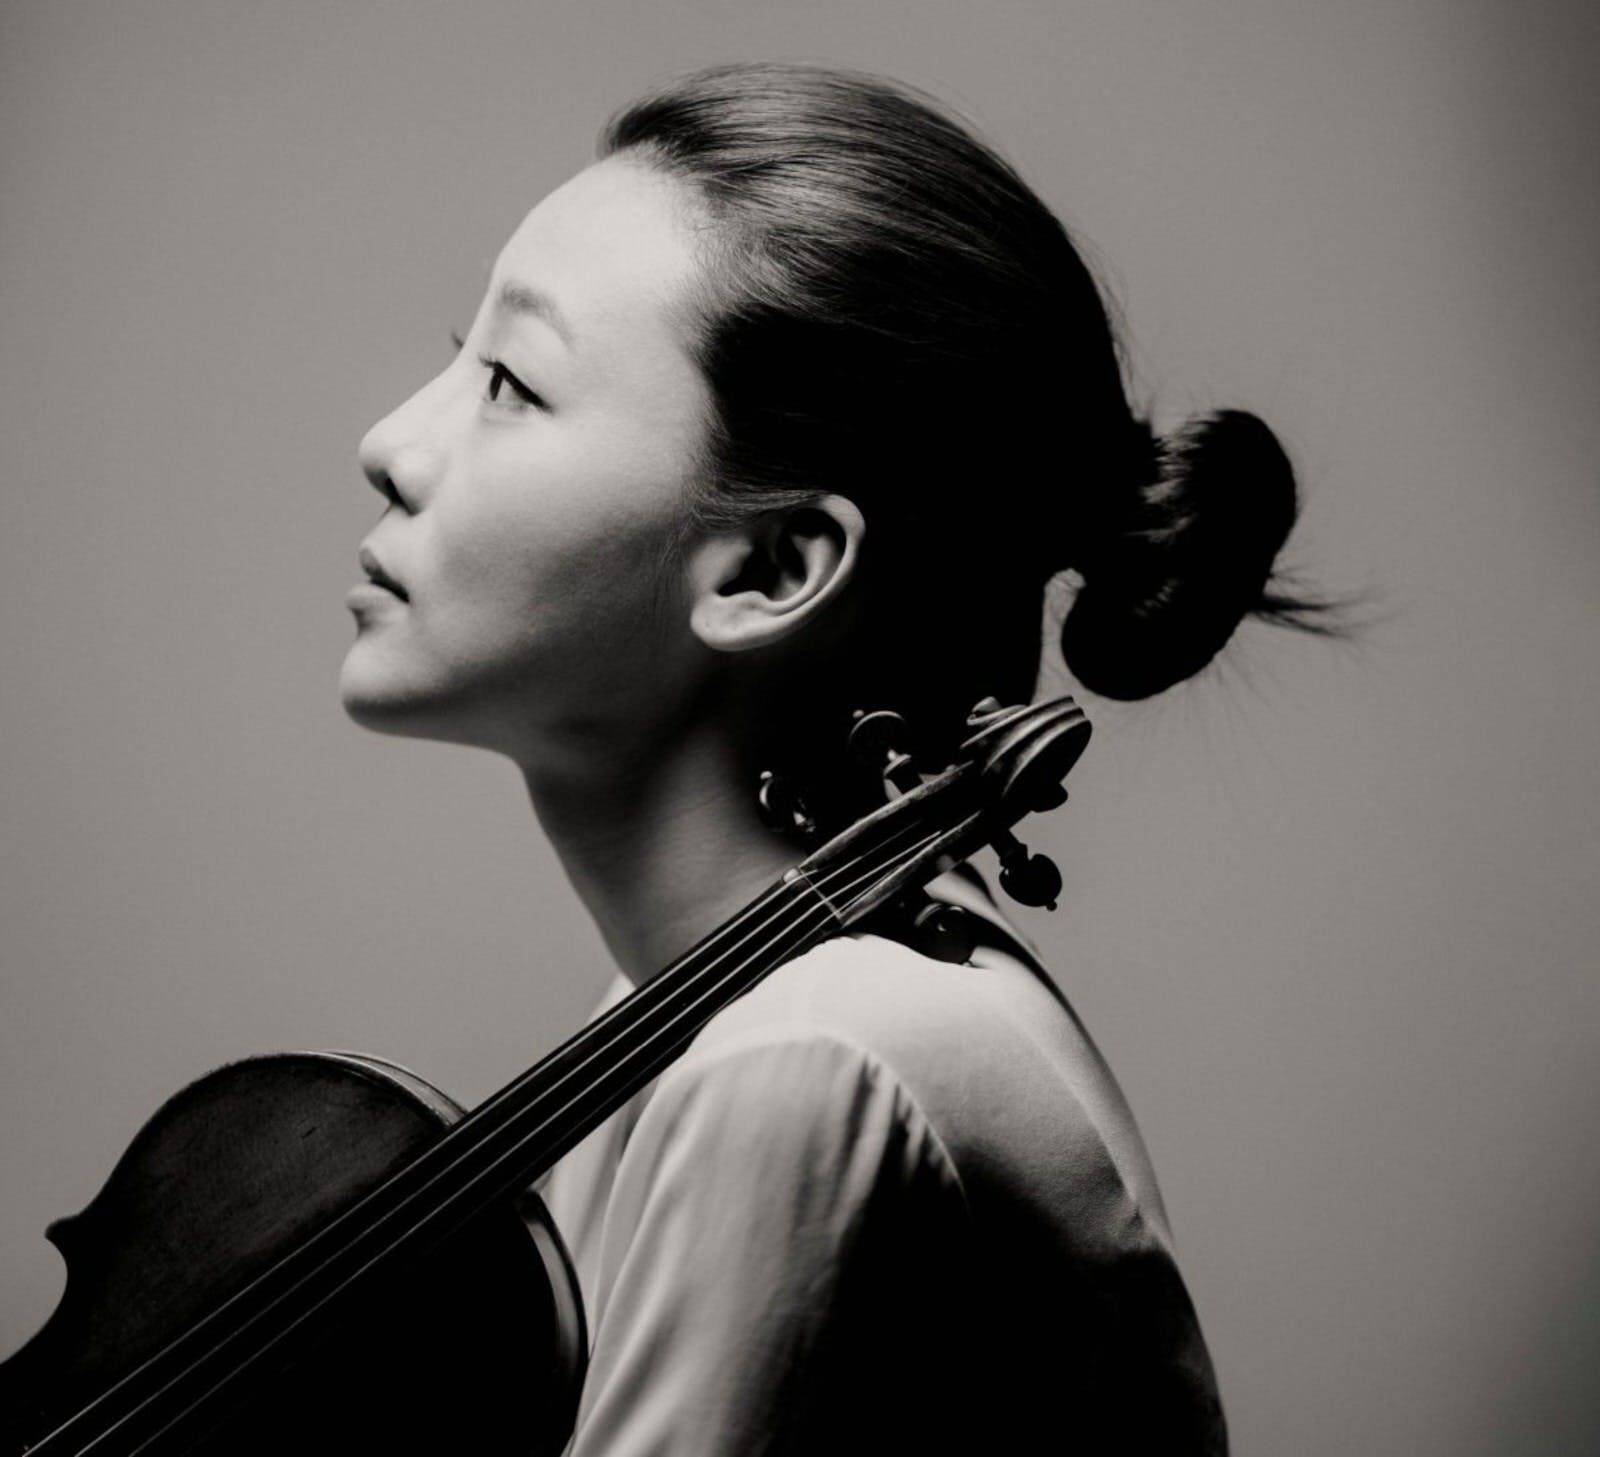 Monochrome photograph of a woman, against a grey backdrop, with a violin leaning on her shoulder.